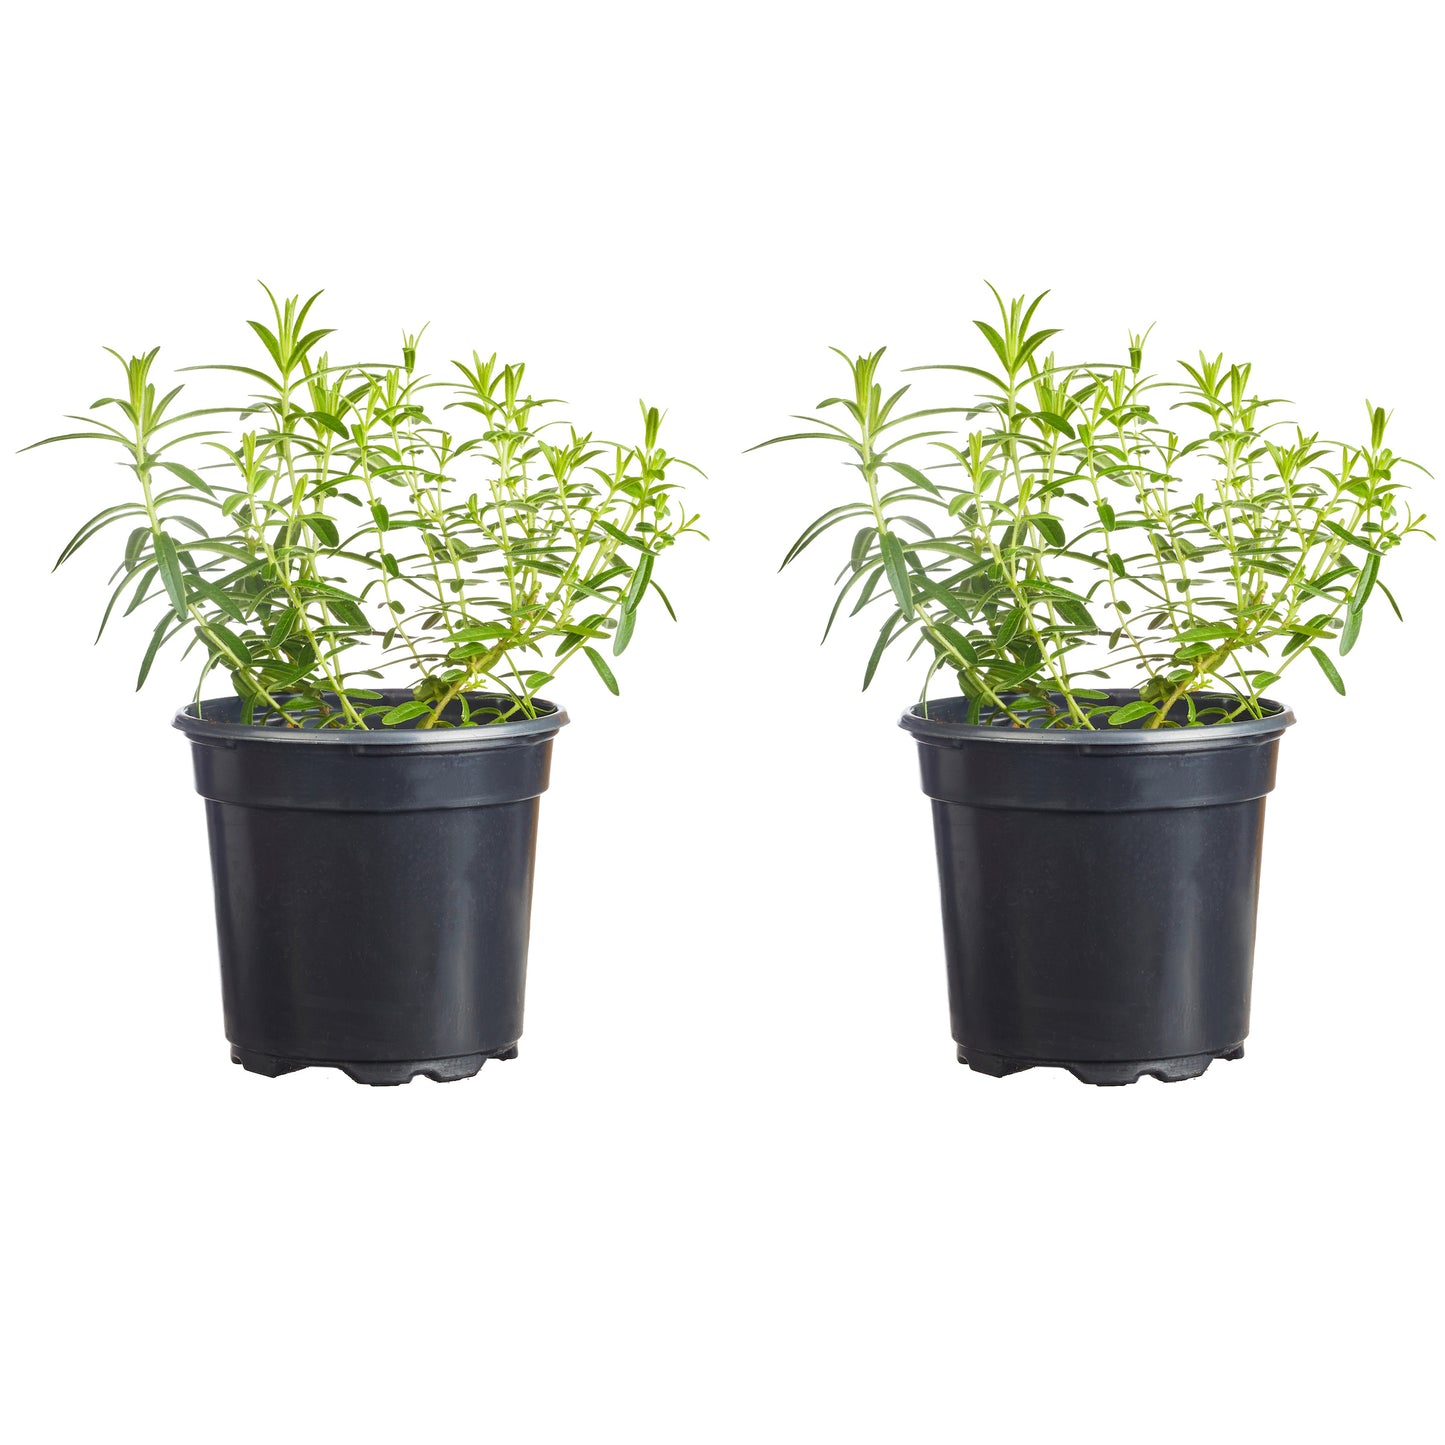 Butterfly Weed Asclepias Tuberosa Mix Plantlings Plus Live Baby Plants 4in. Pot, 2-Pack